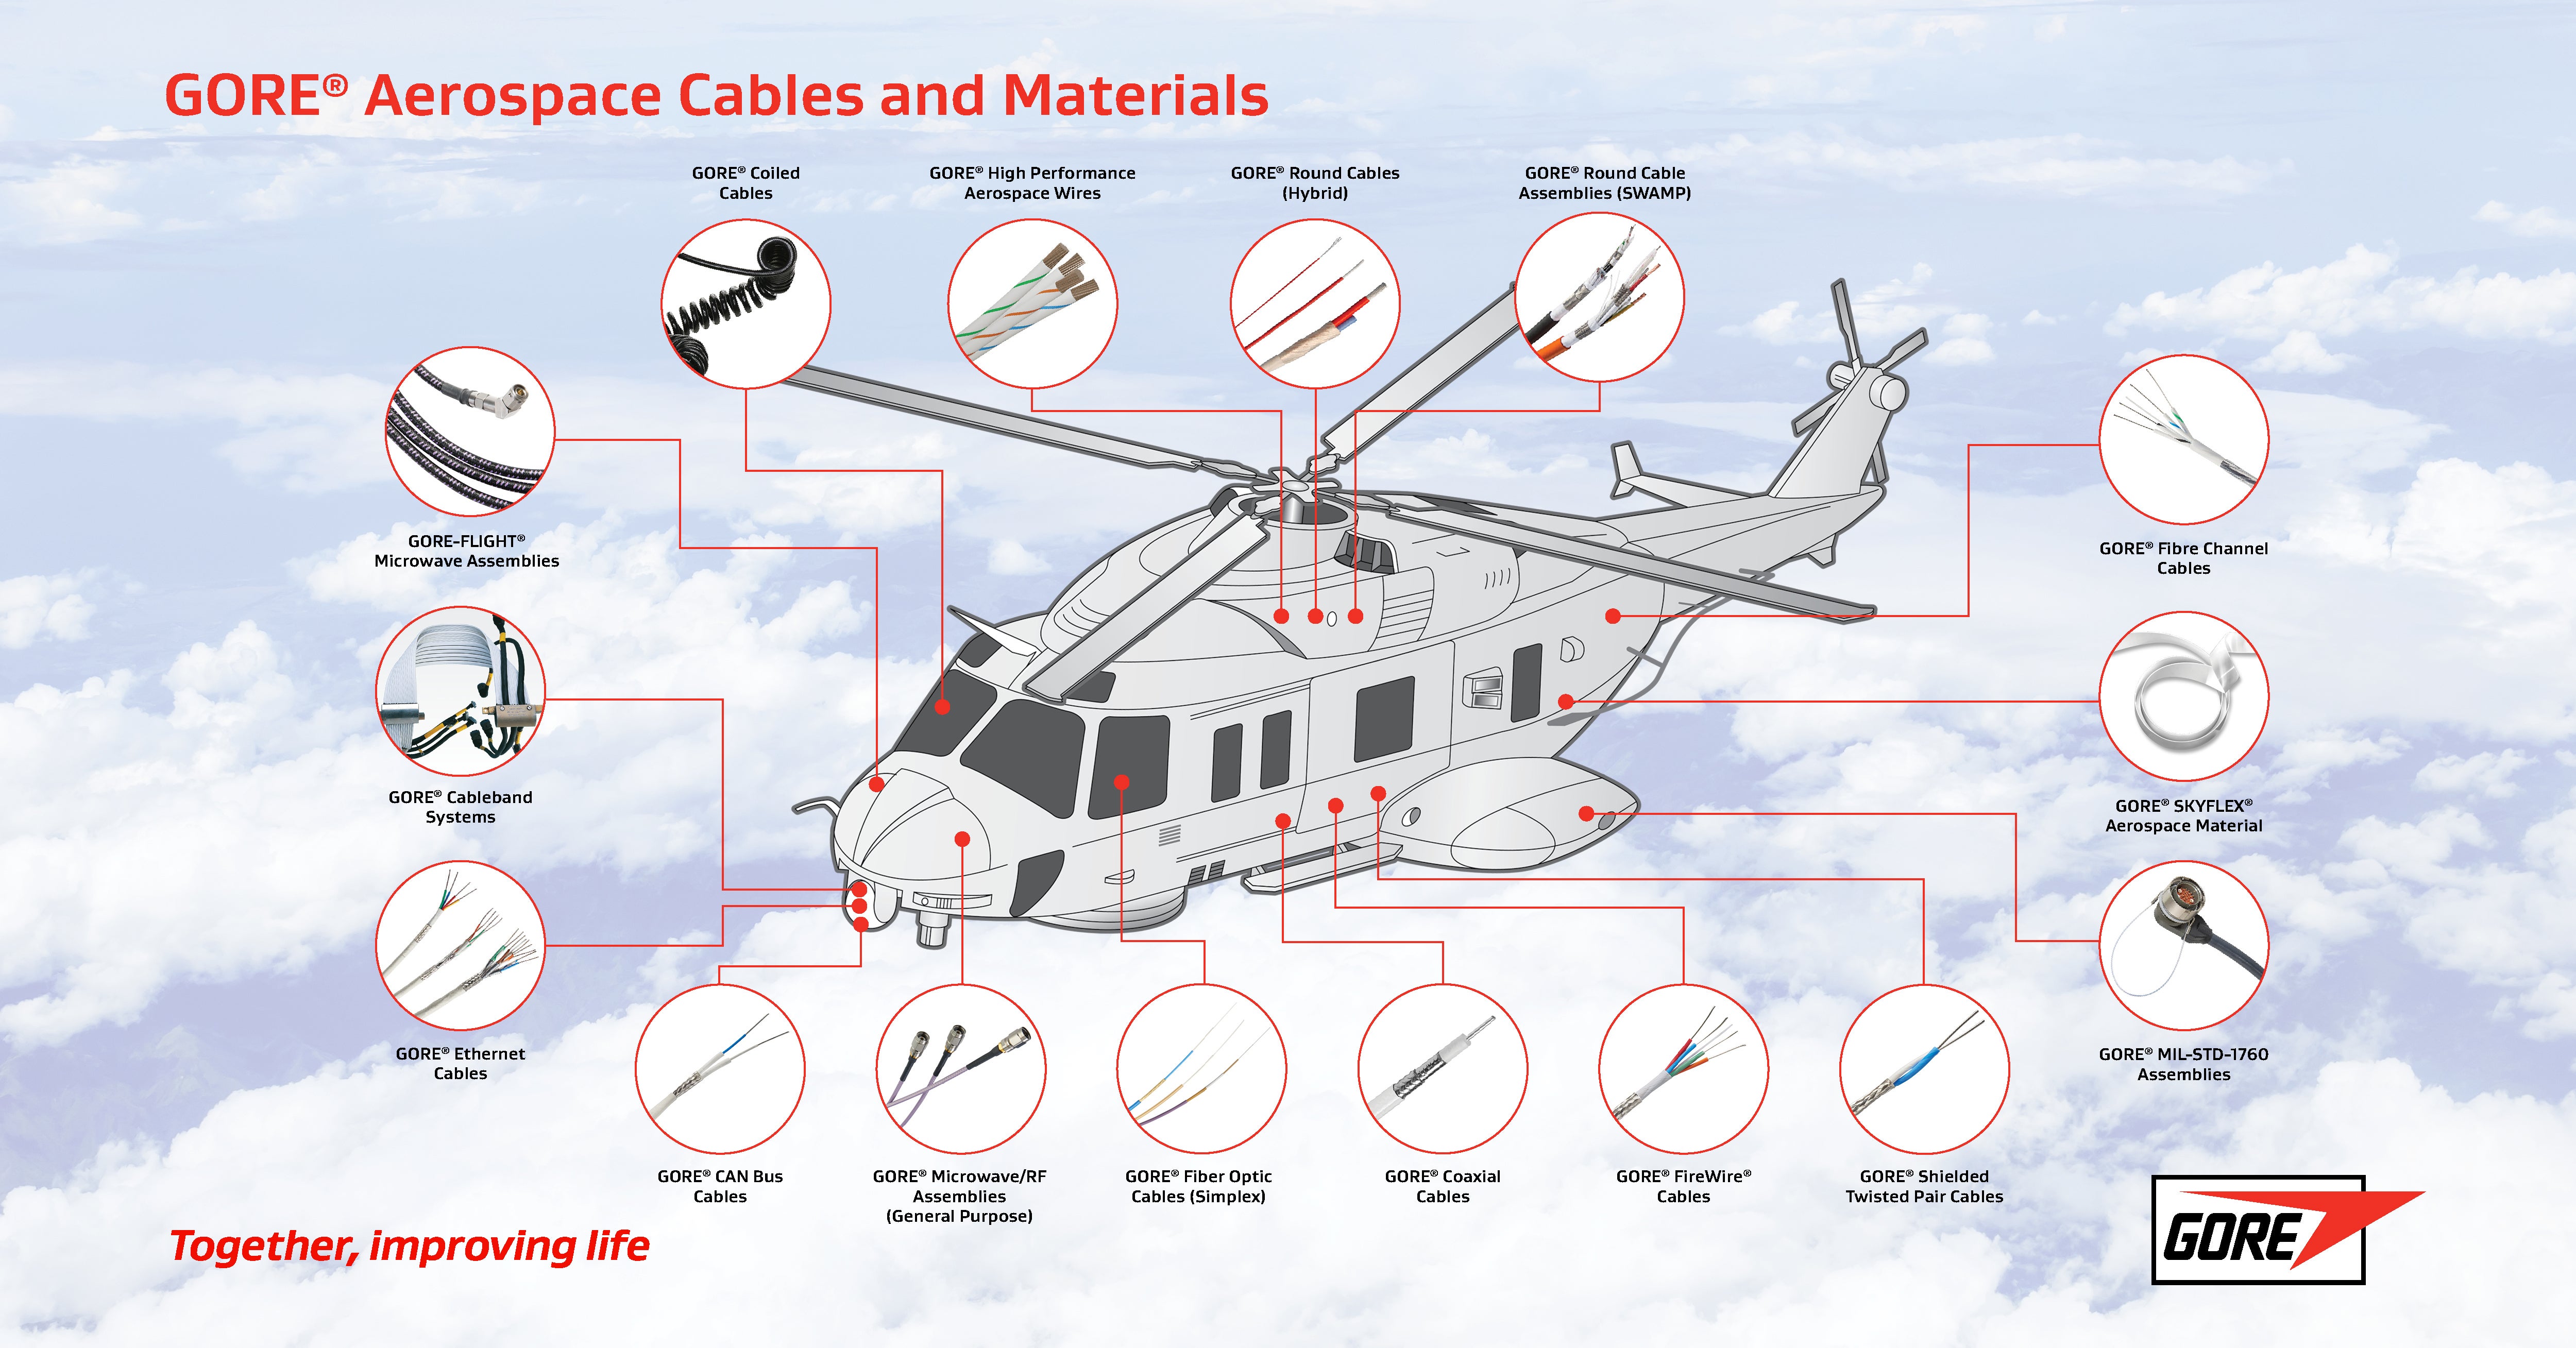 Gore’s cables and materials in a military helicopter